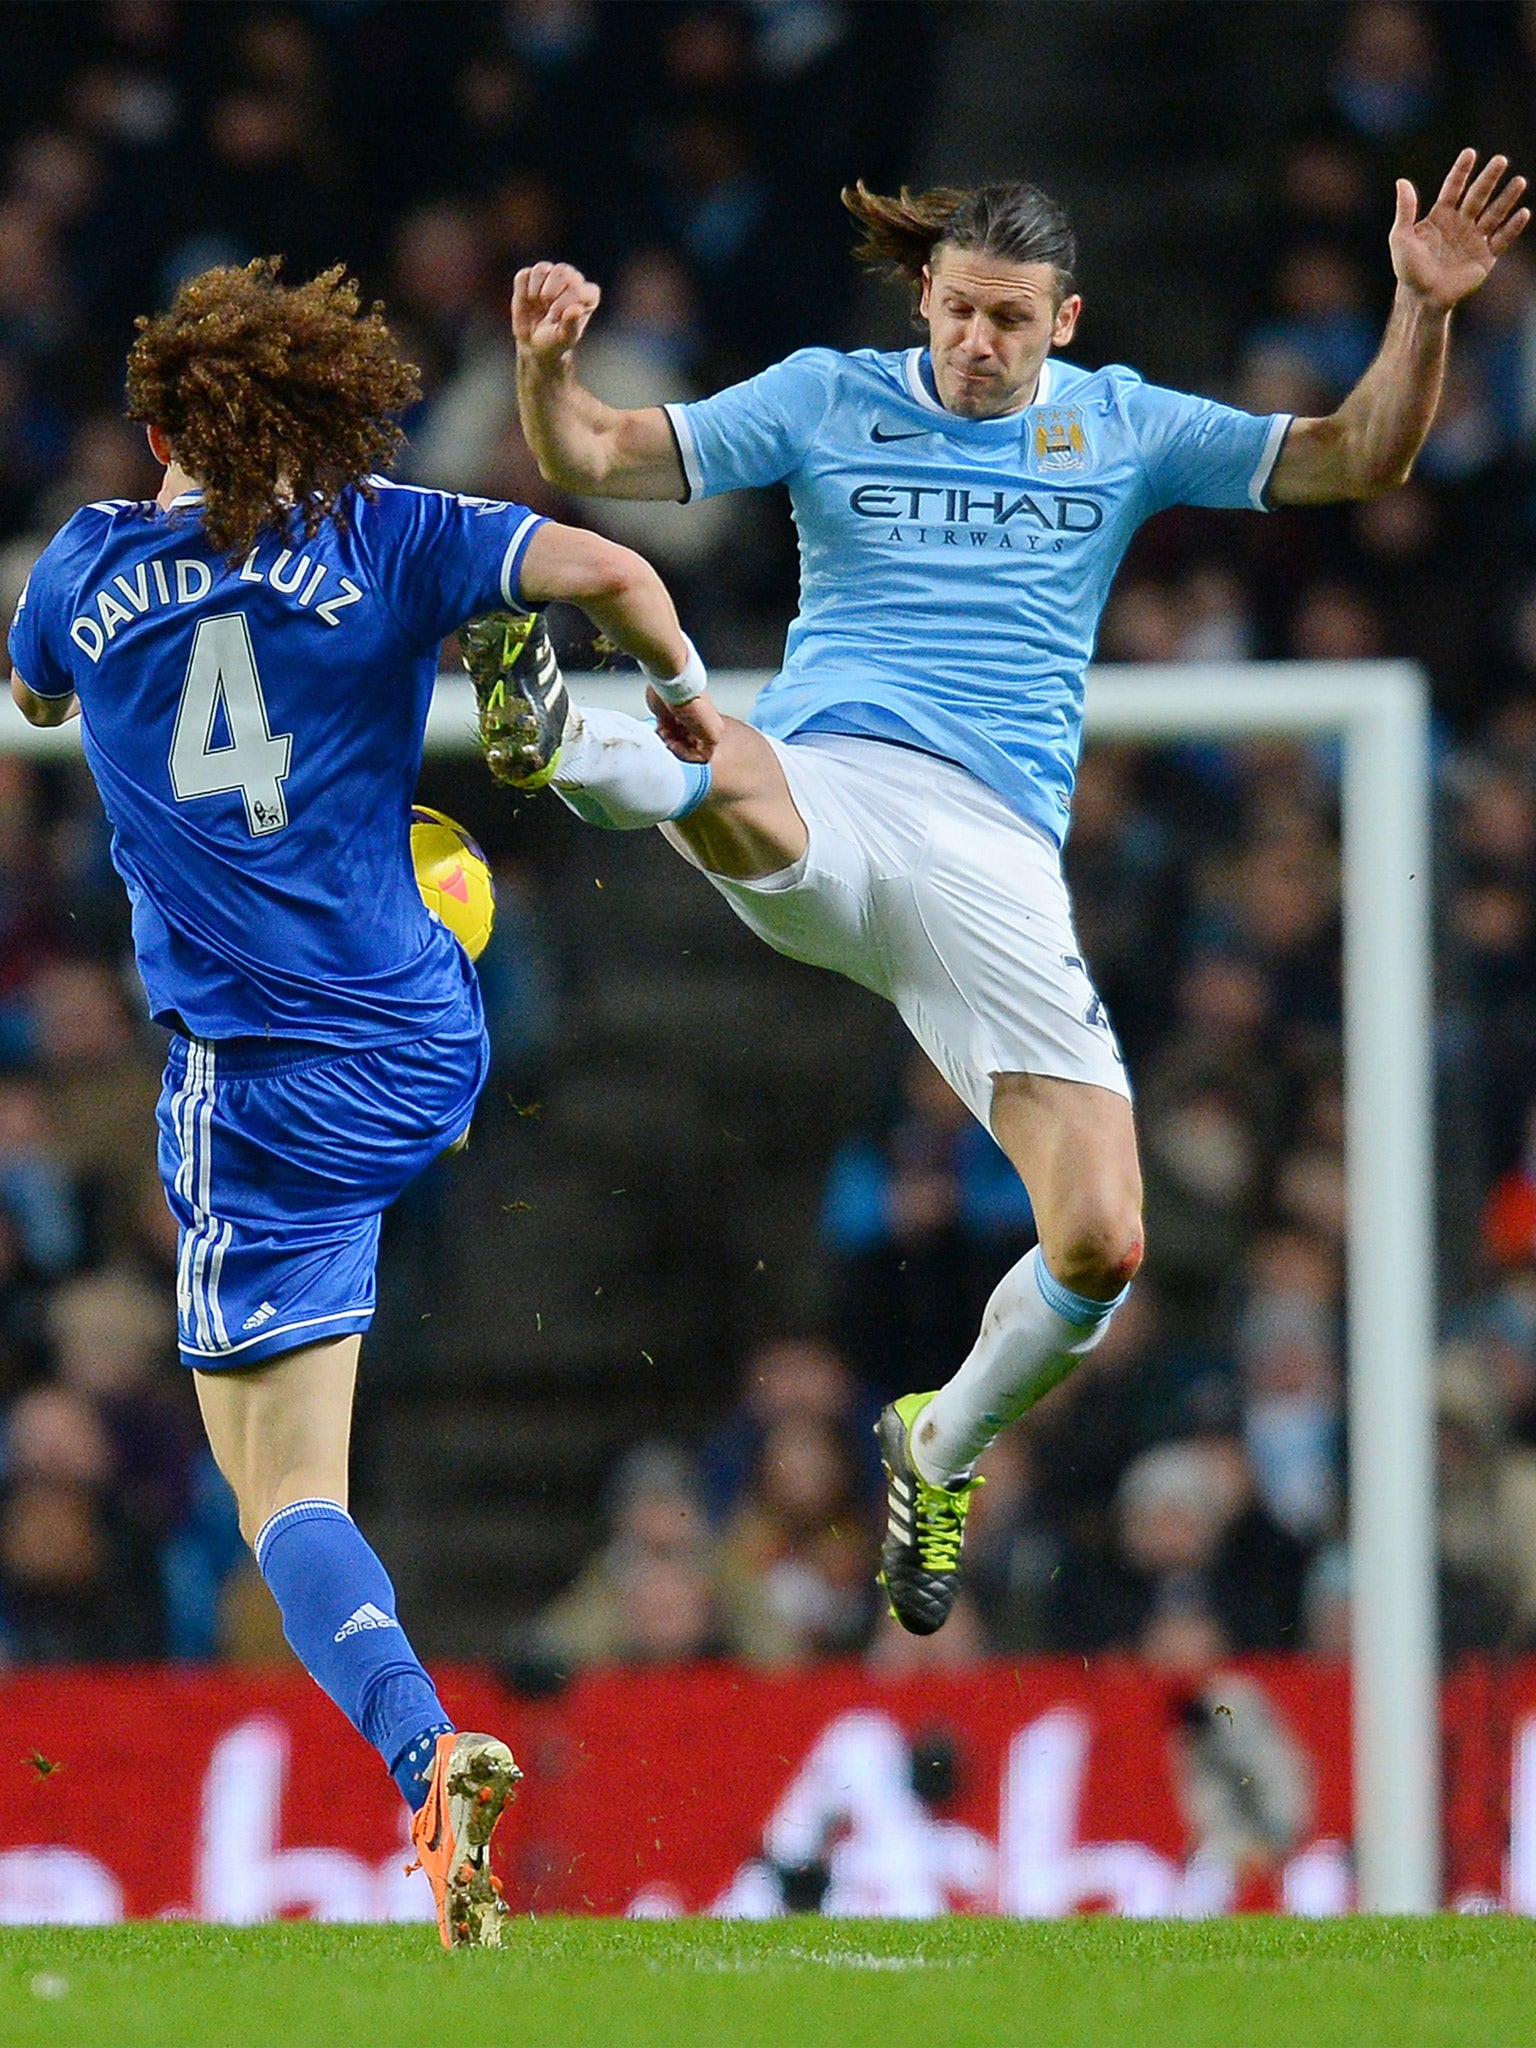 Martin Demichelis was too immobile for City’s midfield and struggled against the likes of David Luiz